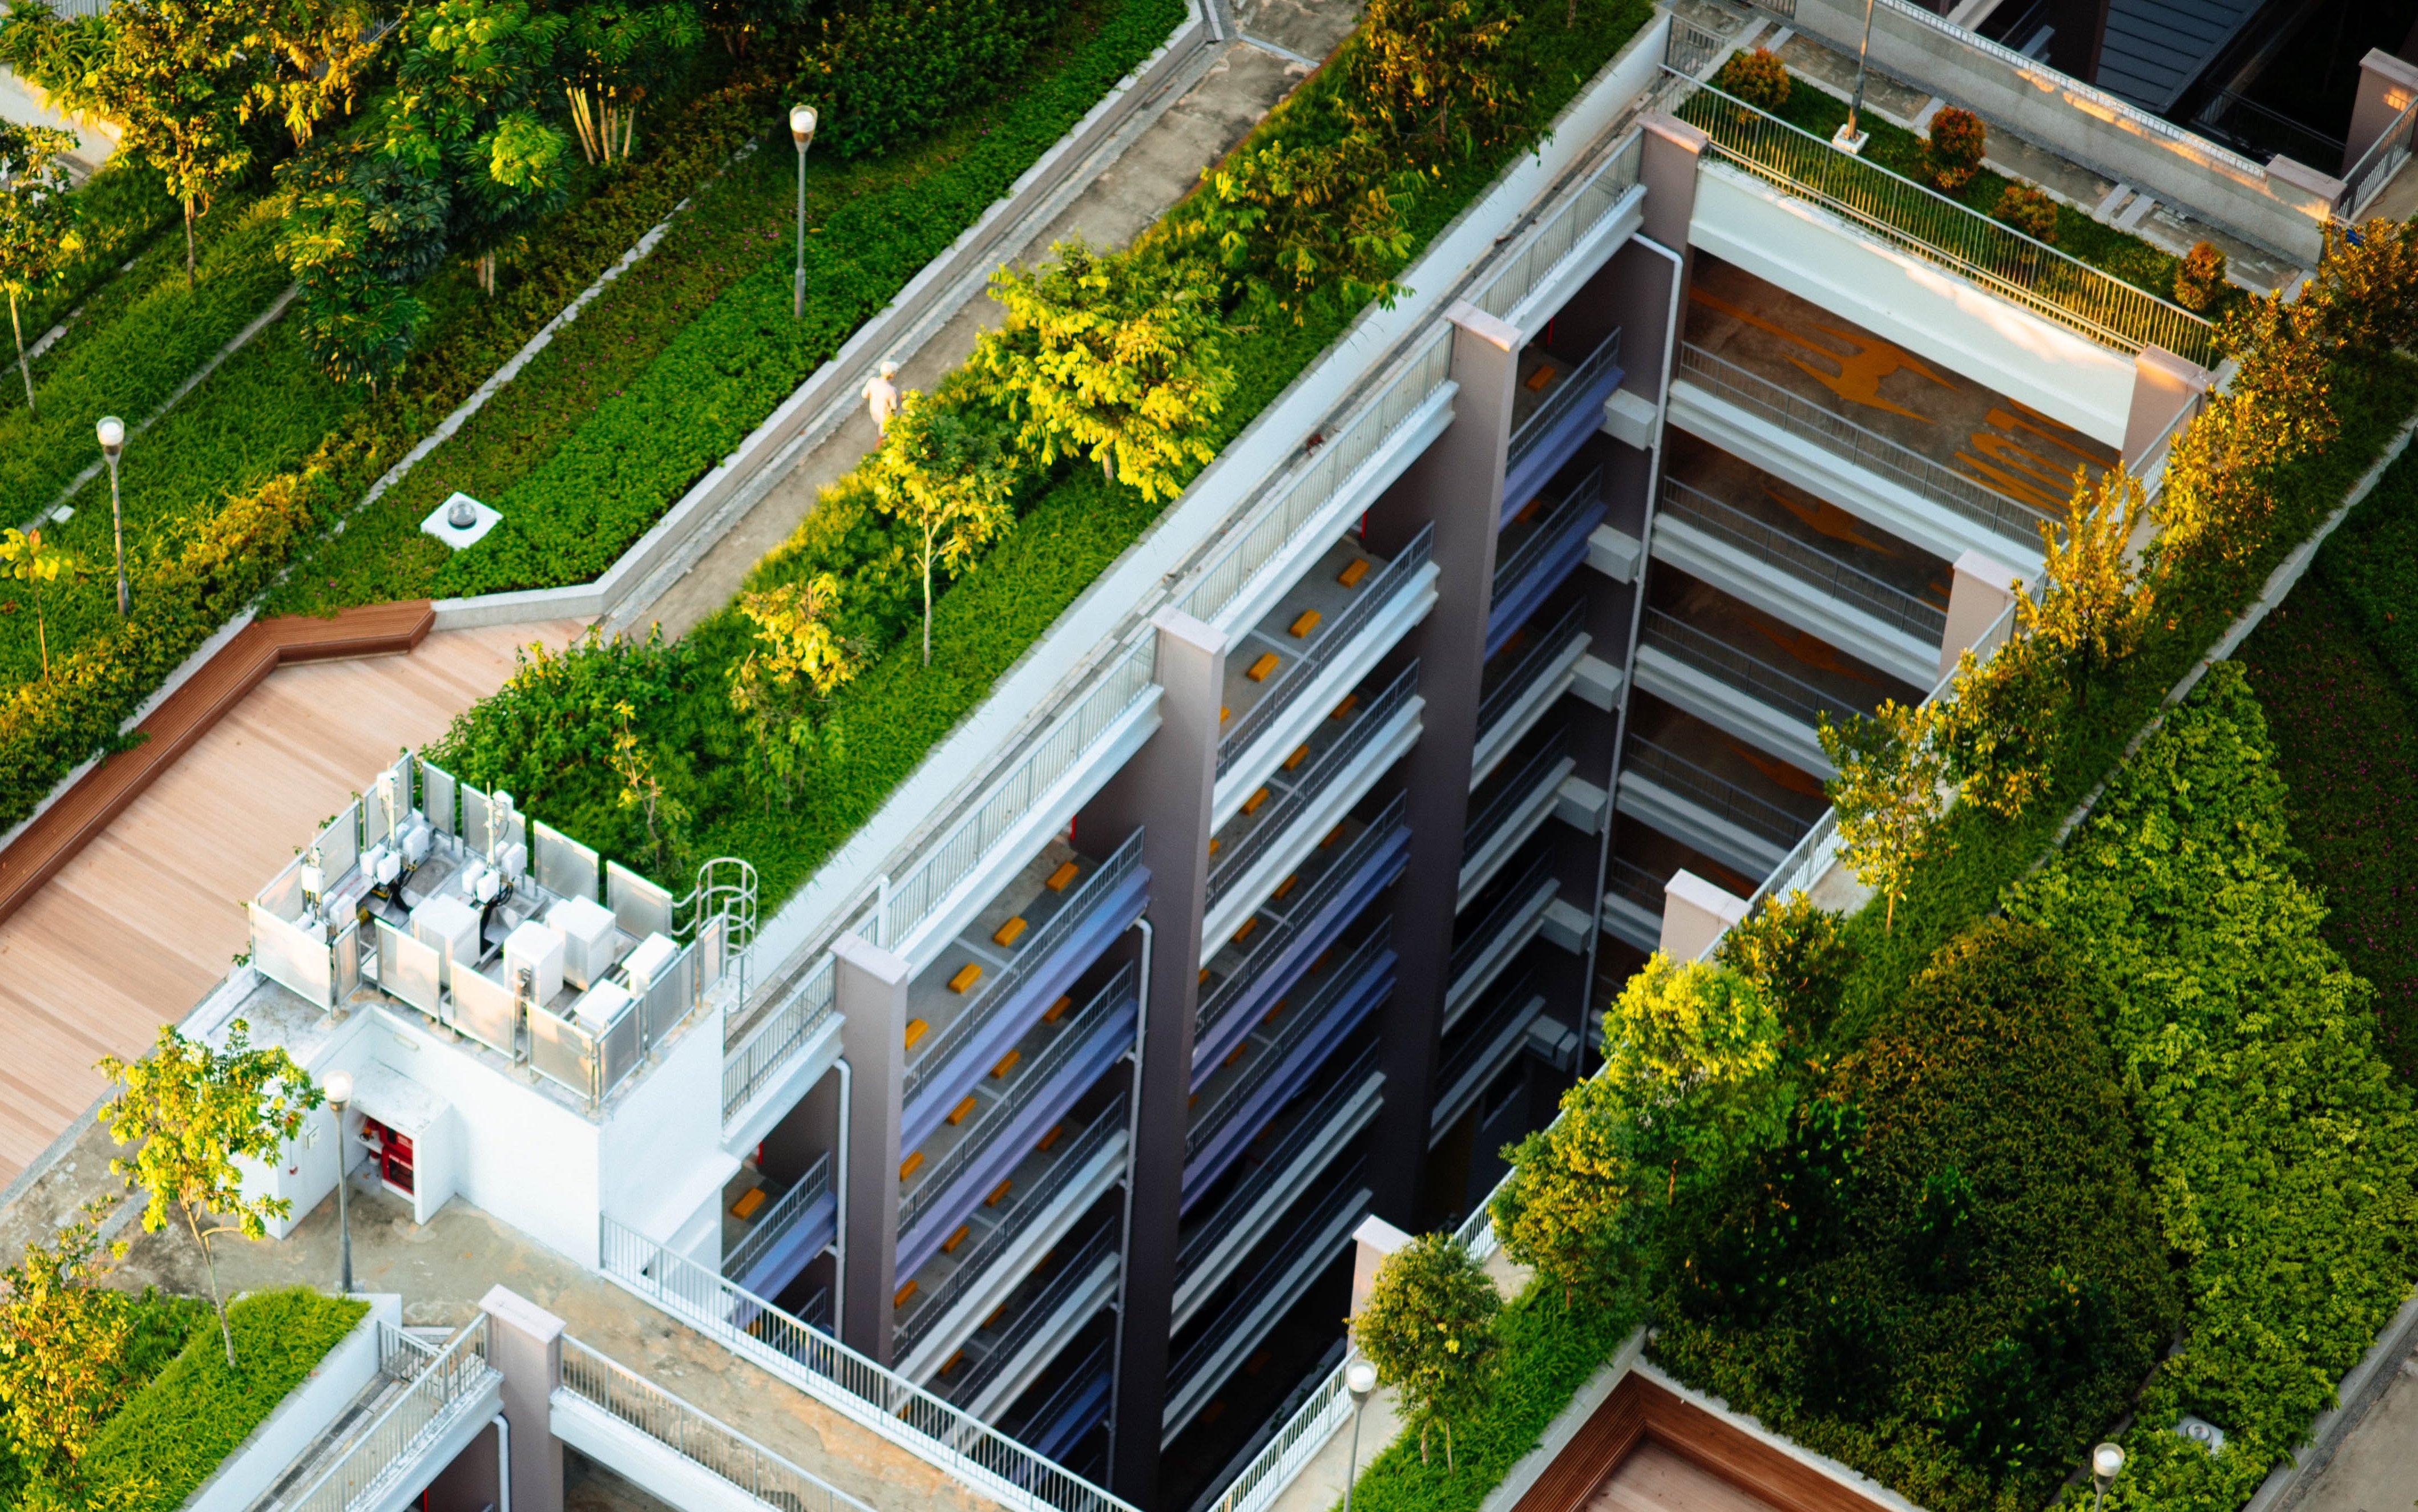 Aereal view of green roofs